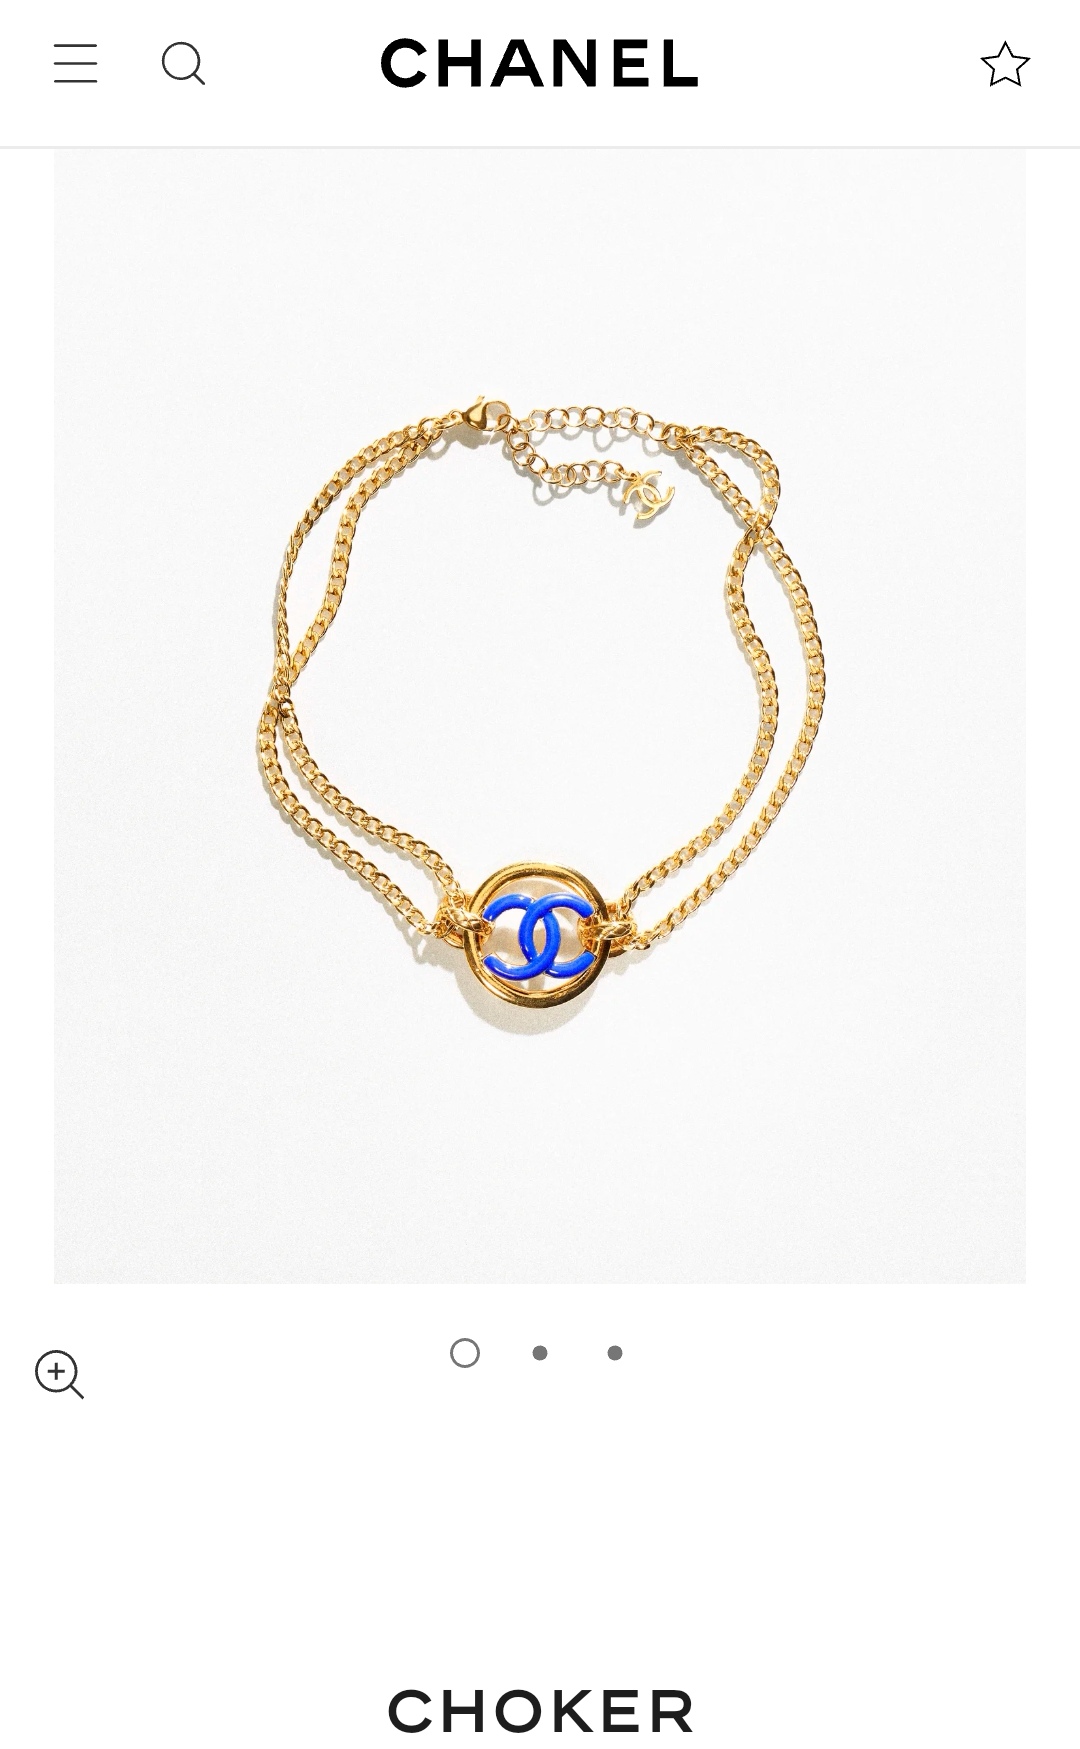 Chanel necklace choker